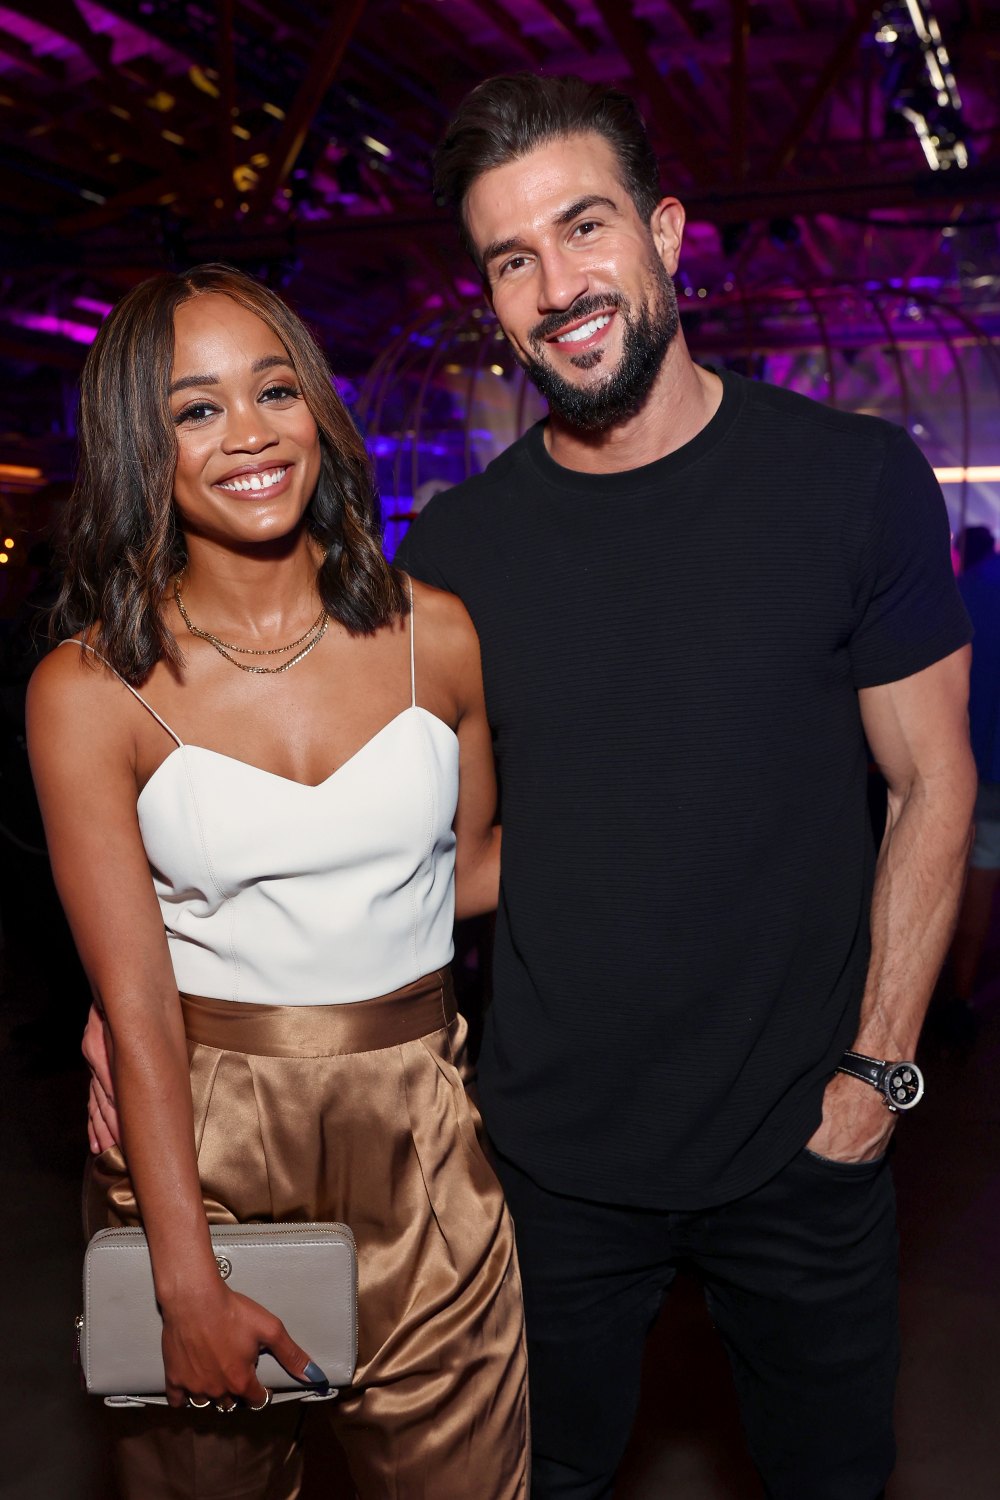 Rachel Lindsay and Bryan Abasolo Work to ‘Protect' Marriage Despite Living ‘Totally Different Lives’